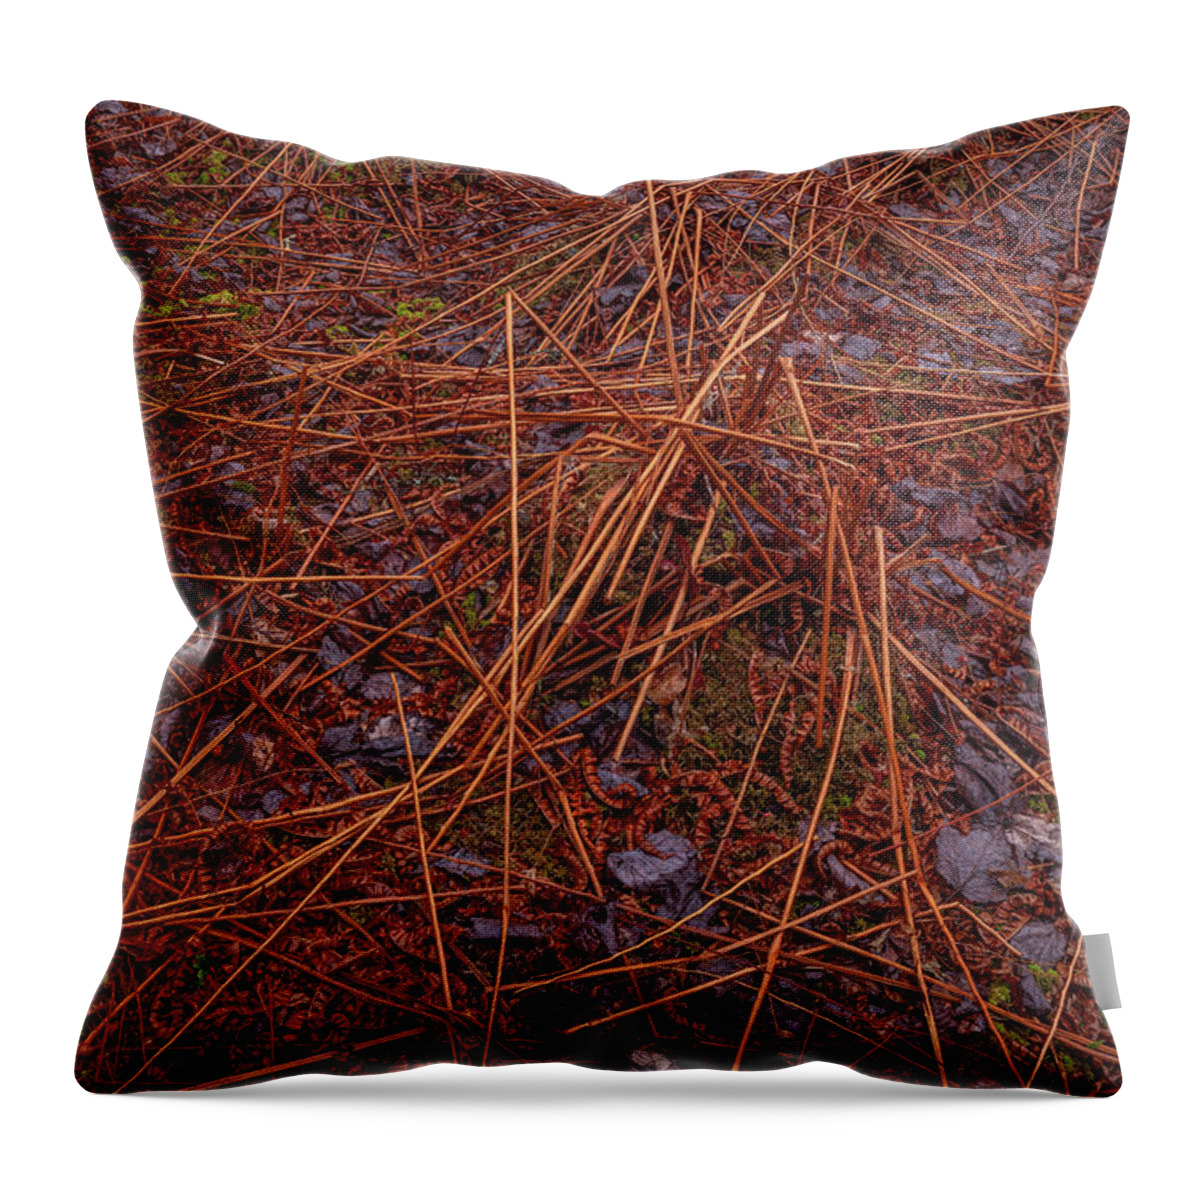 Blue Mountain-birch Cove Lakes Wilderness Area Throw Pillow featuring the photograph Aftermath by Irwin Barrett